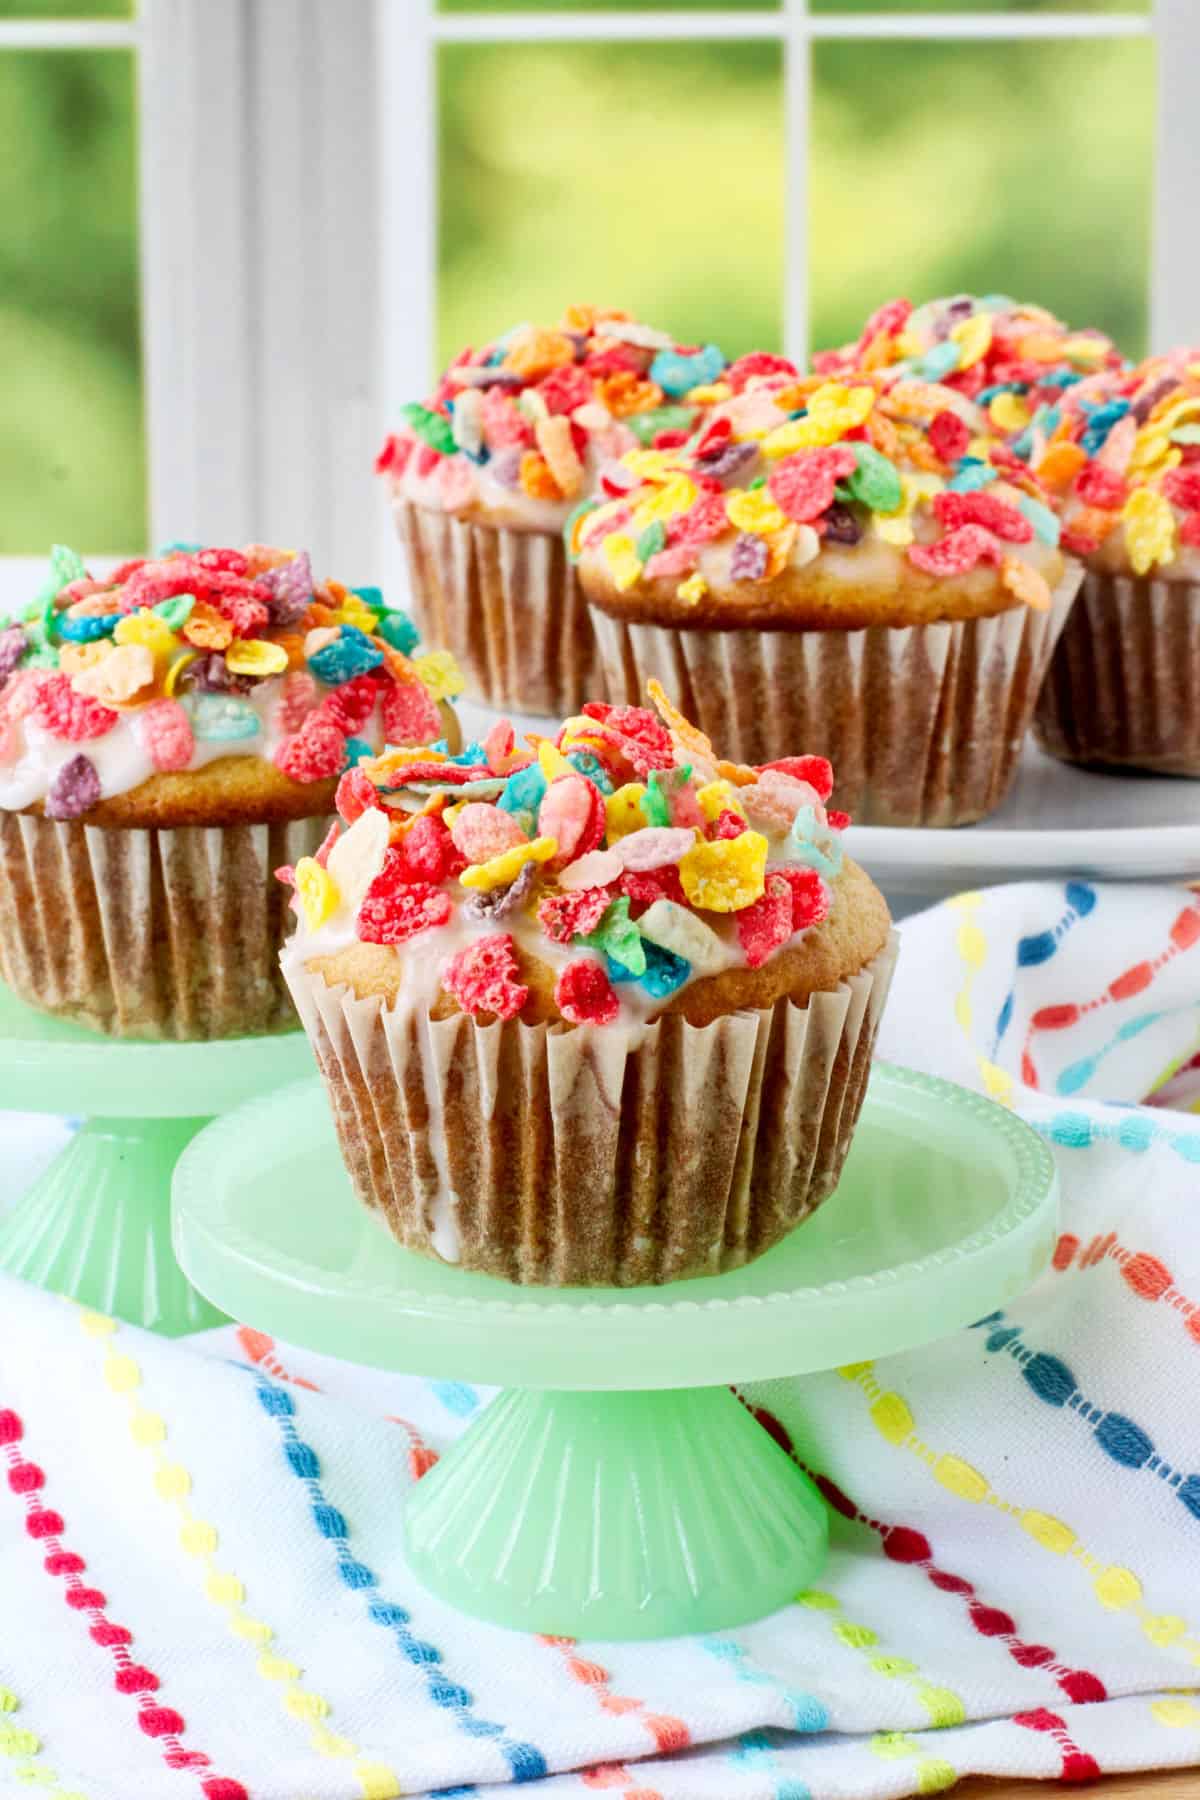 Cereal Milk Muffins on individual green cake stands.